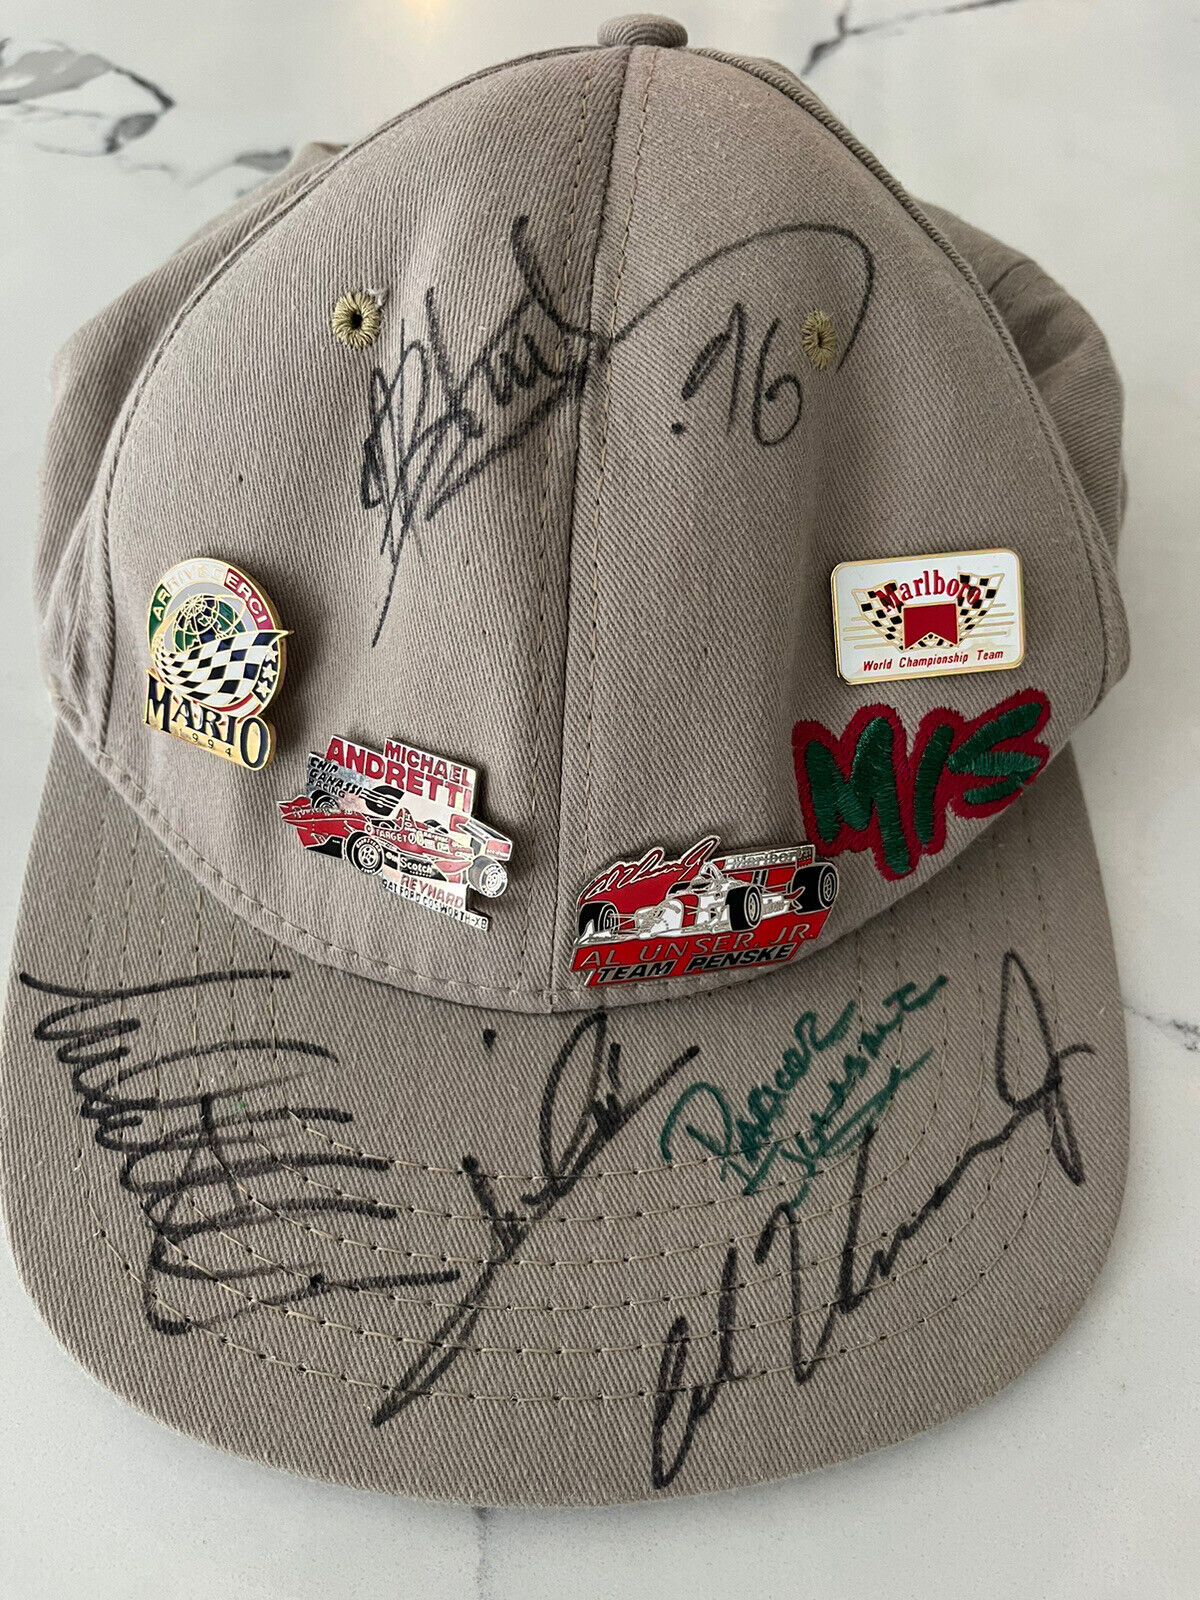 Michael And Mario Andretti Al Under Jr Signed Hat Pins Mis 1996 Make An Offer!